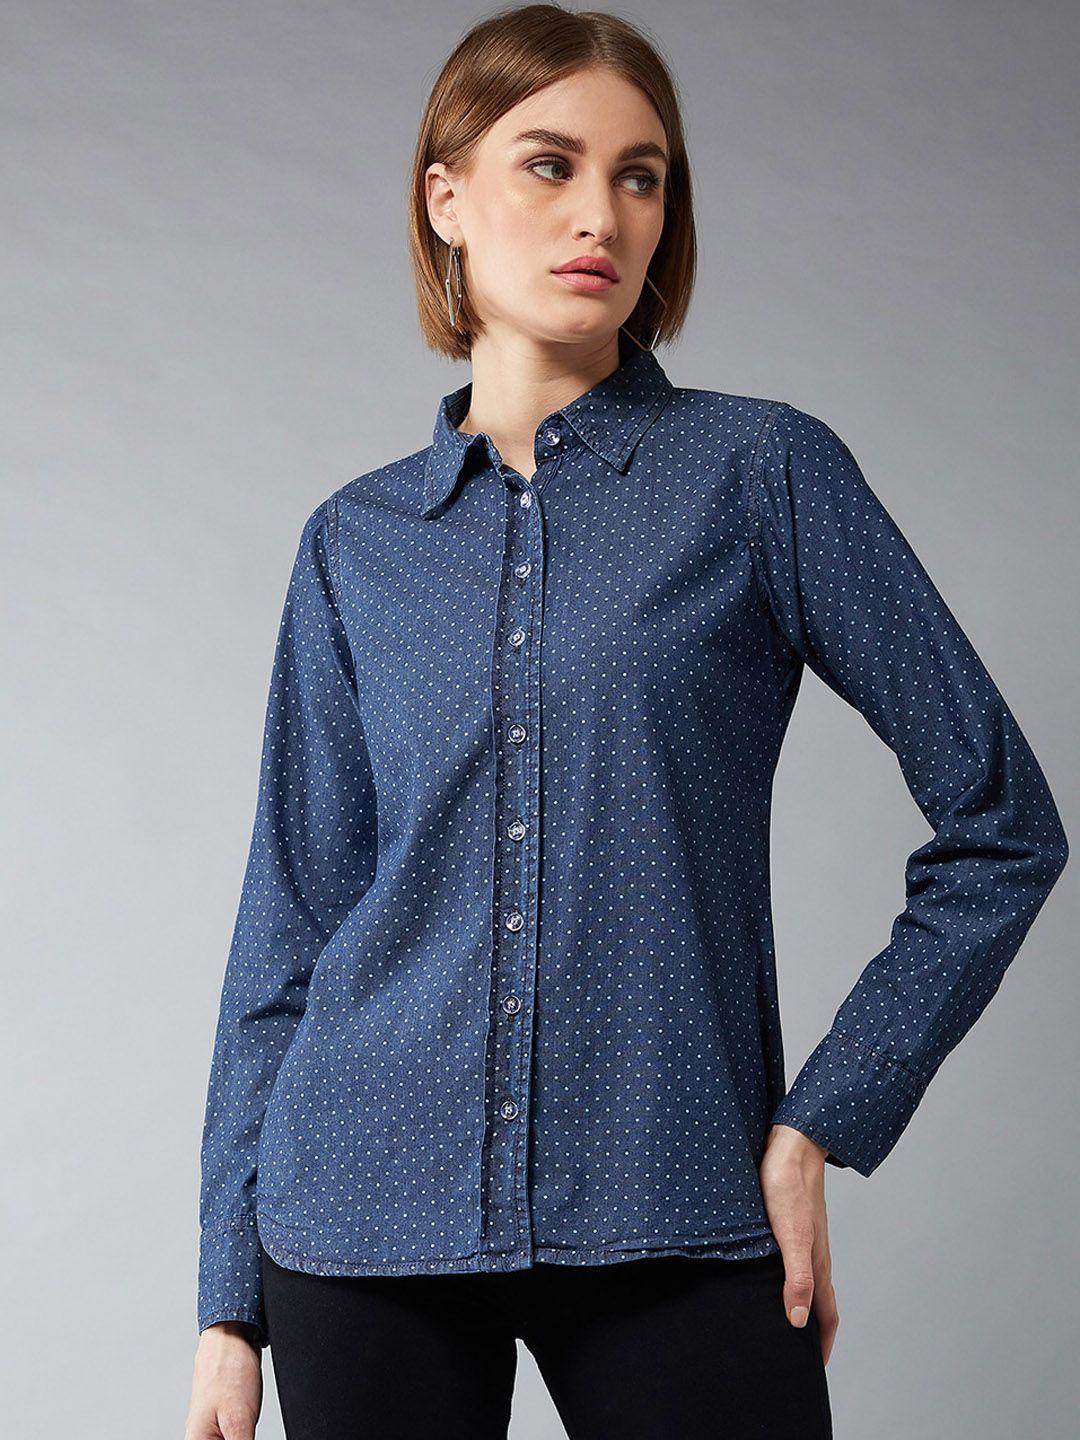 dolce crudo women navy blue & off-white regular fit printed casual shirt